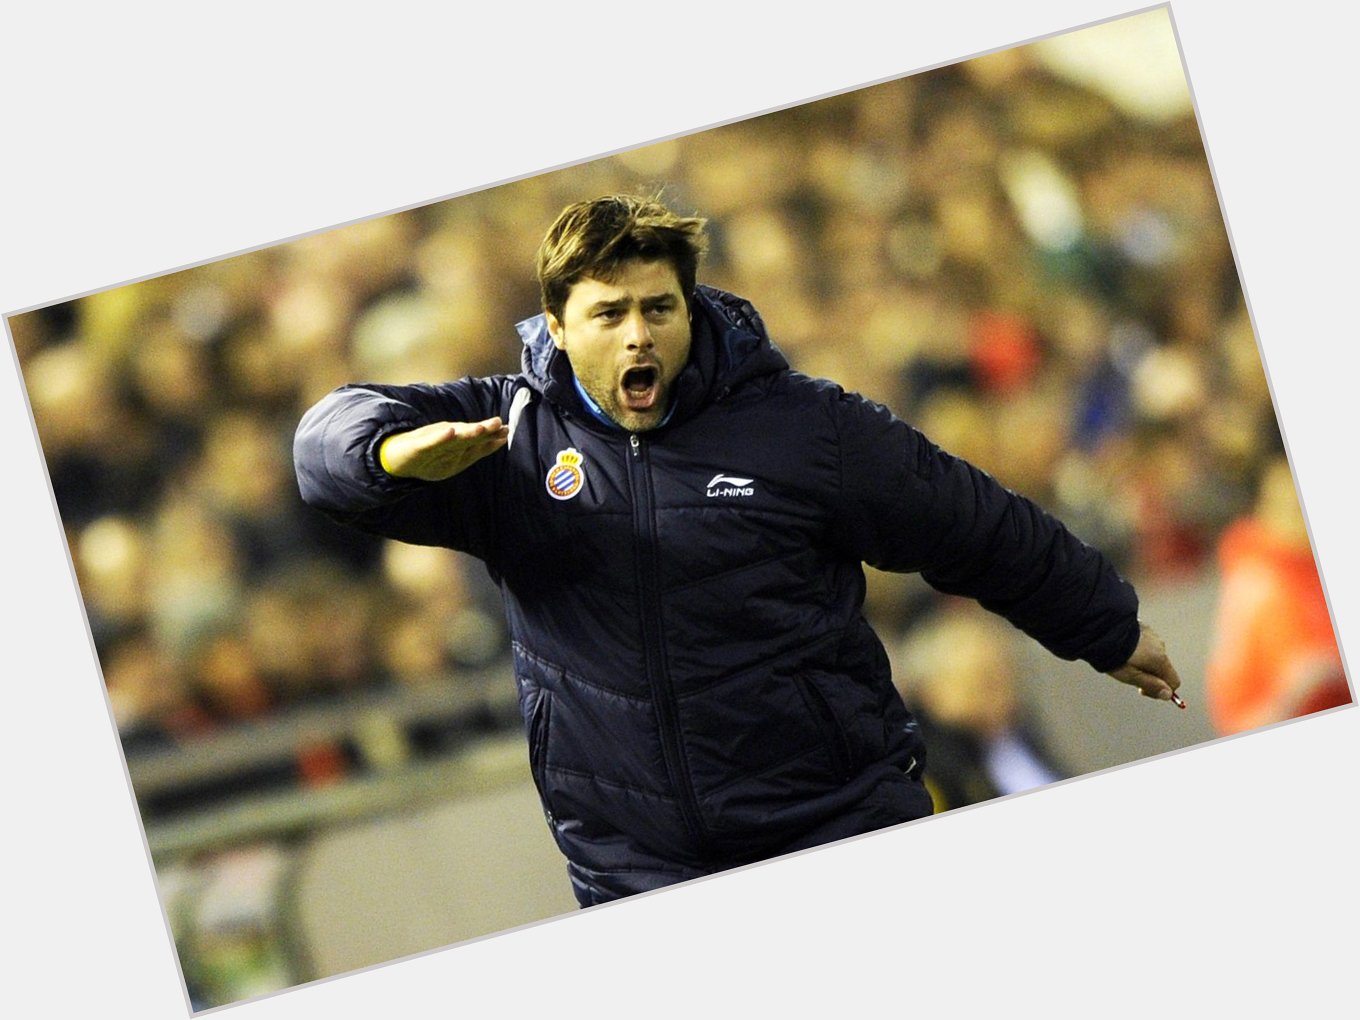 He couldn\t get the present he wanted in the Capital One Cup but happy 43rd birthday to Mauricio Pochettino 